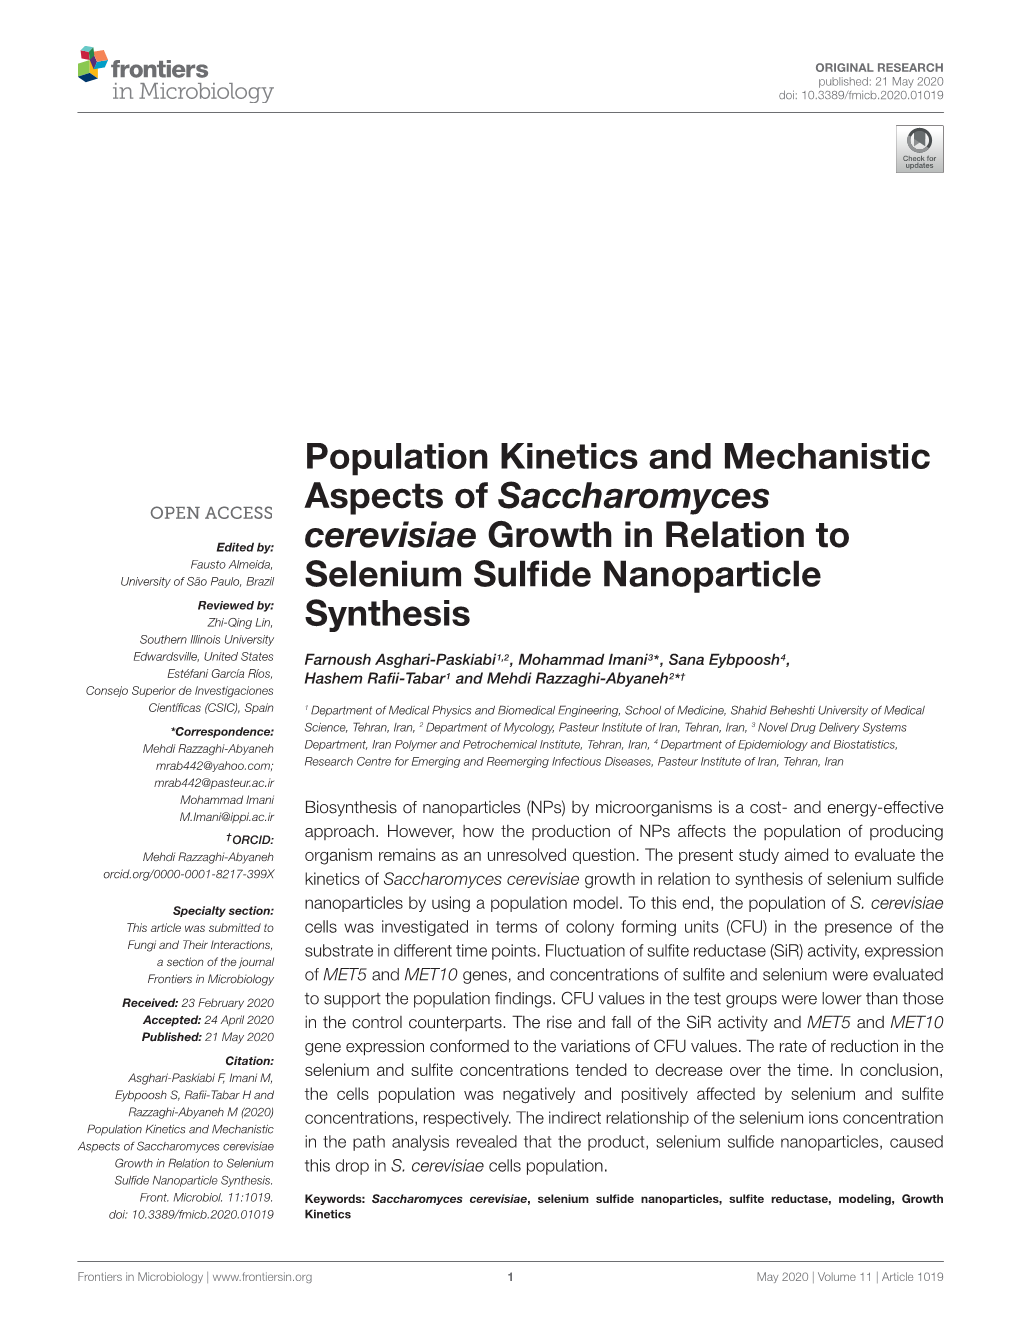 Population Kinetics and Mechanistic Aspects of Saccharomyces